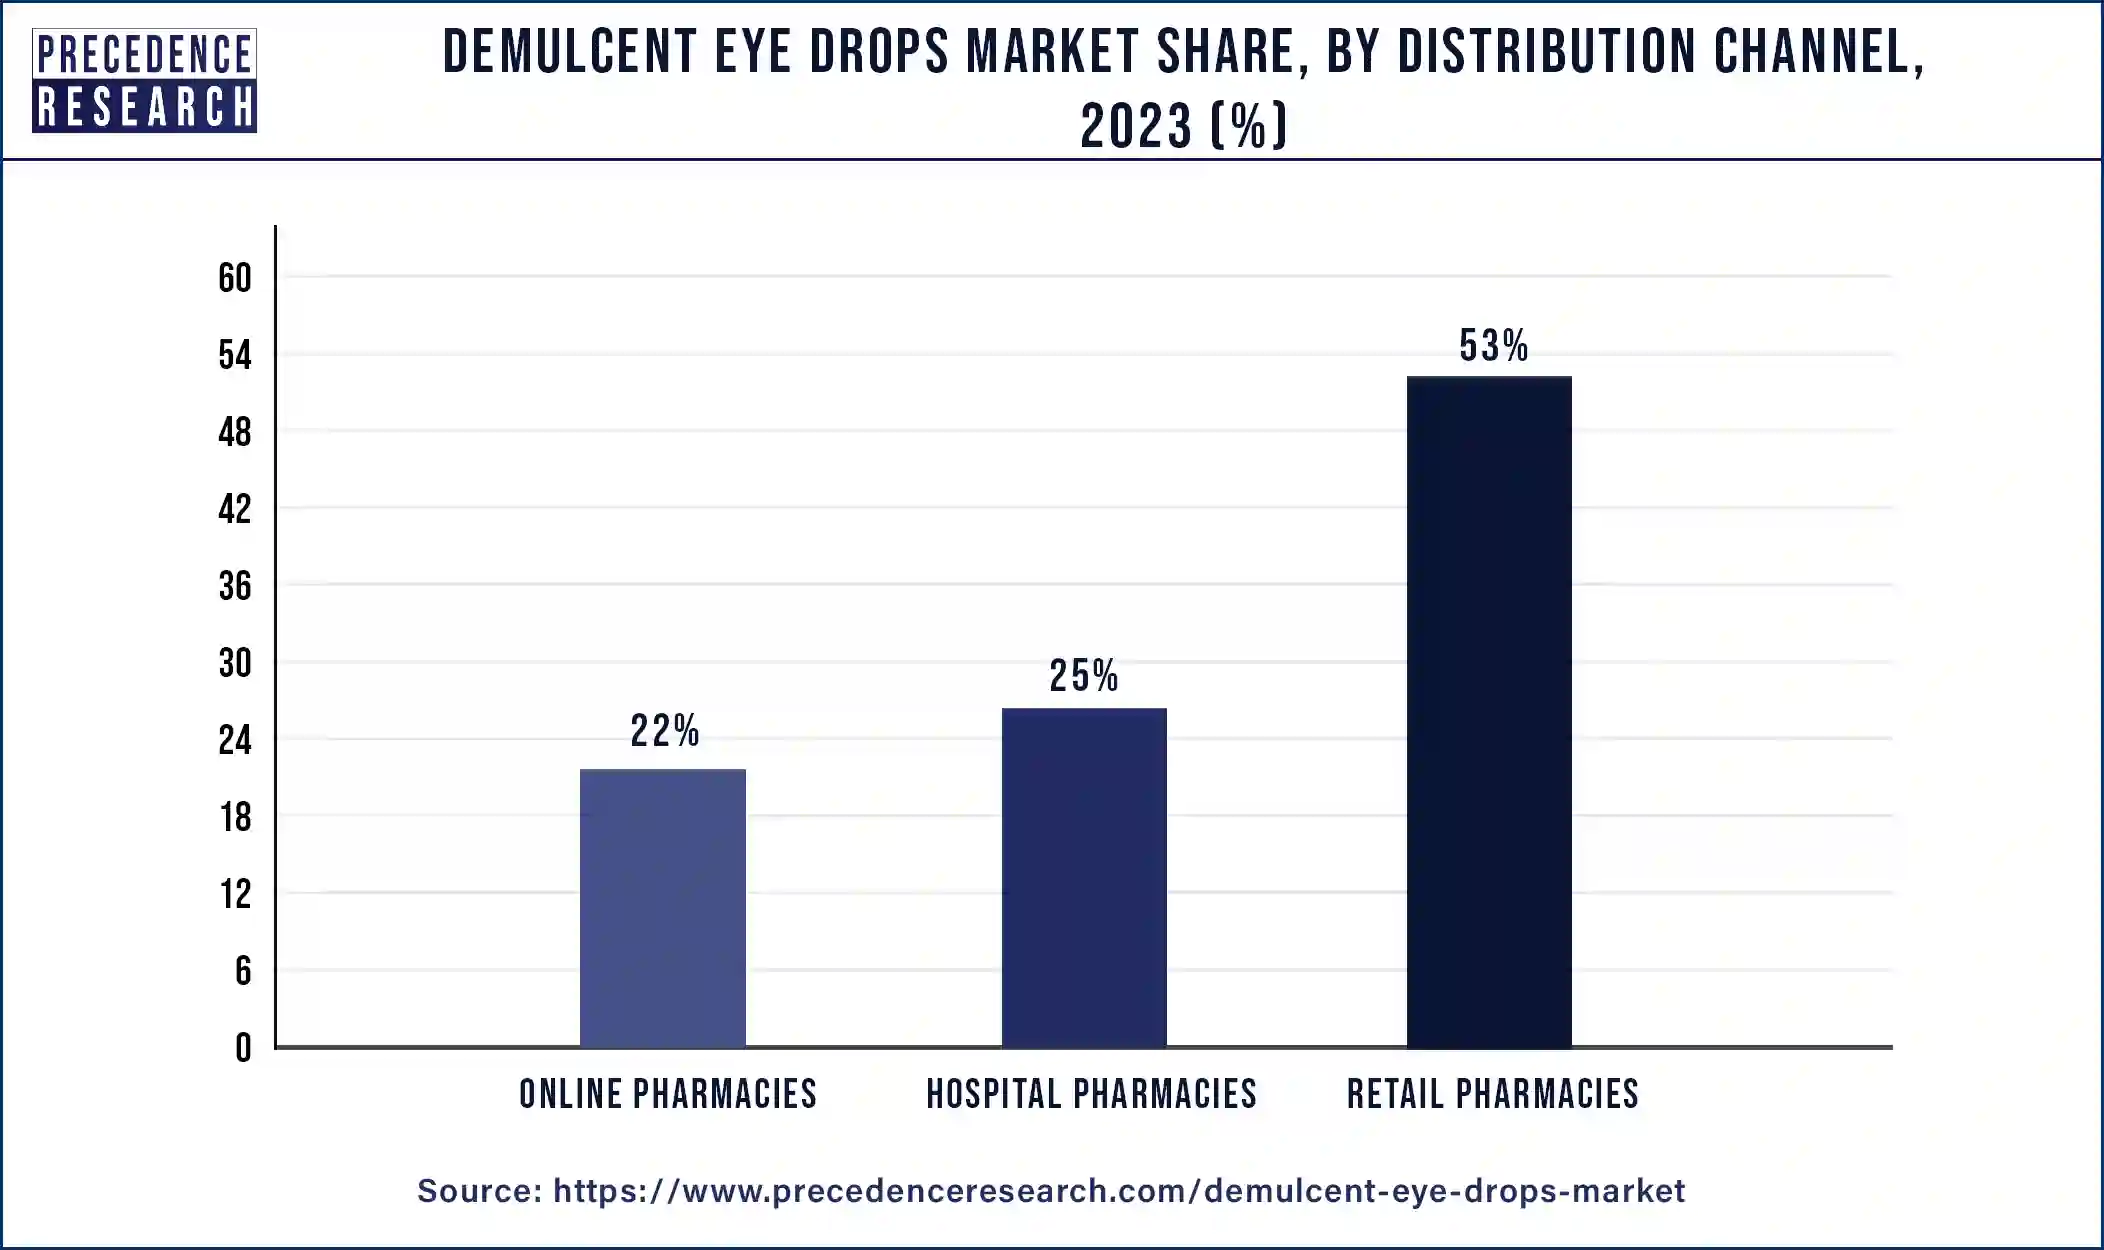 Demulcent Eye Drops Market Share, By Distribution Channel, 2023 (%)